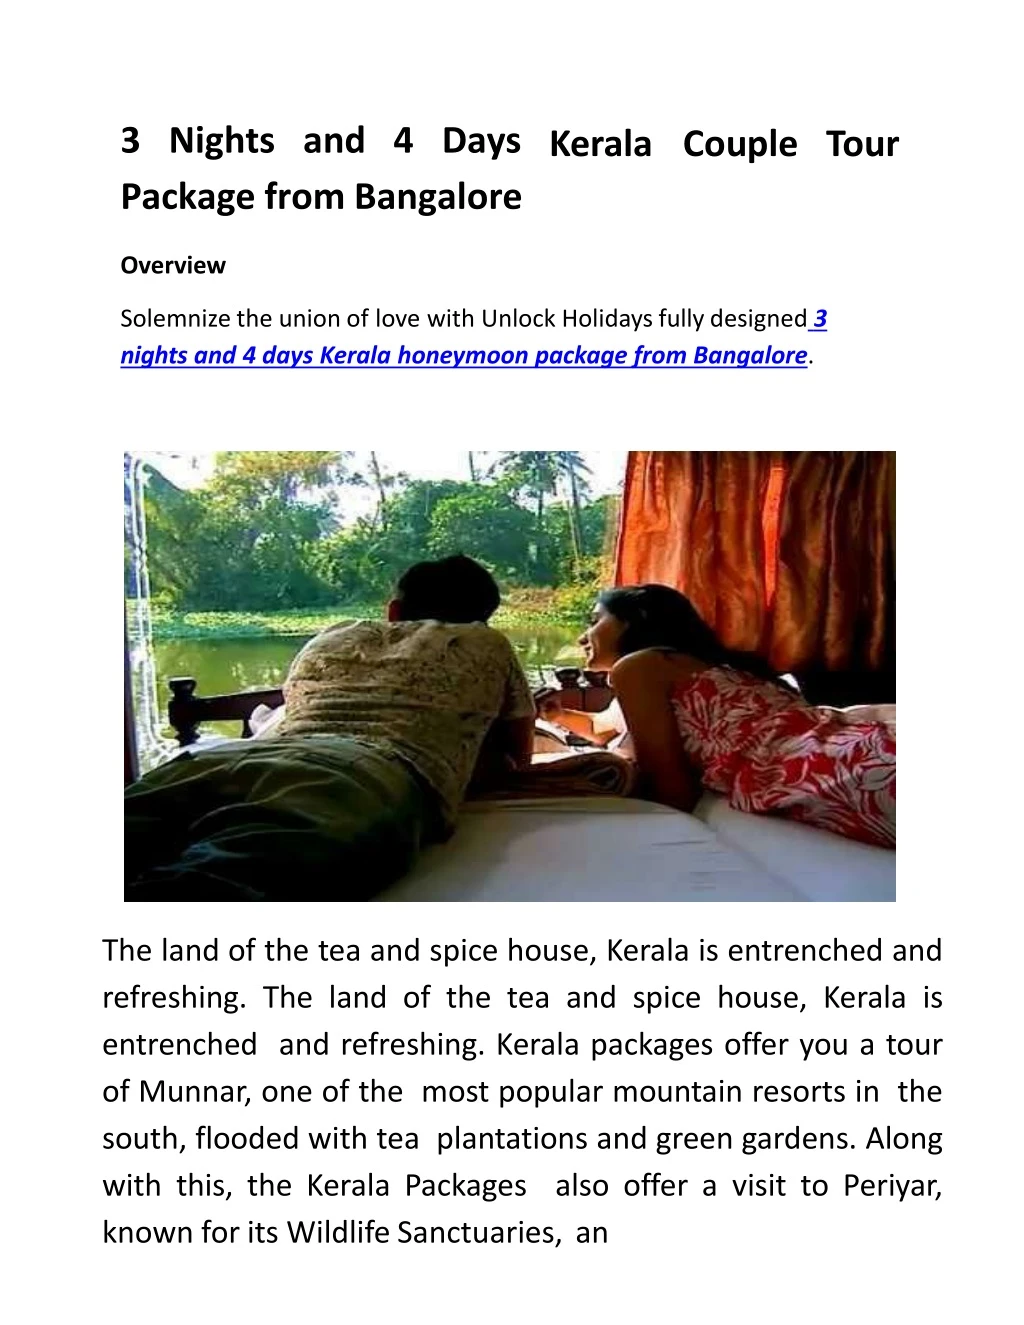 3 nights and 4 days package from bangalore